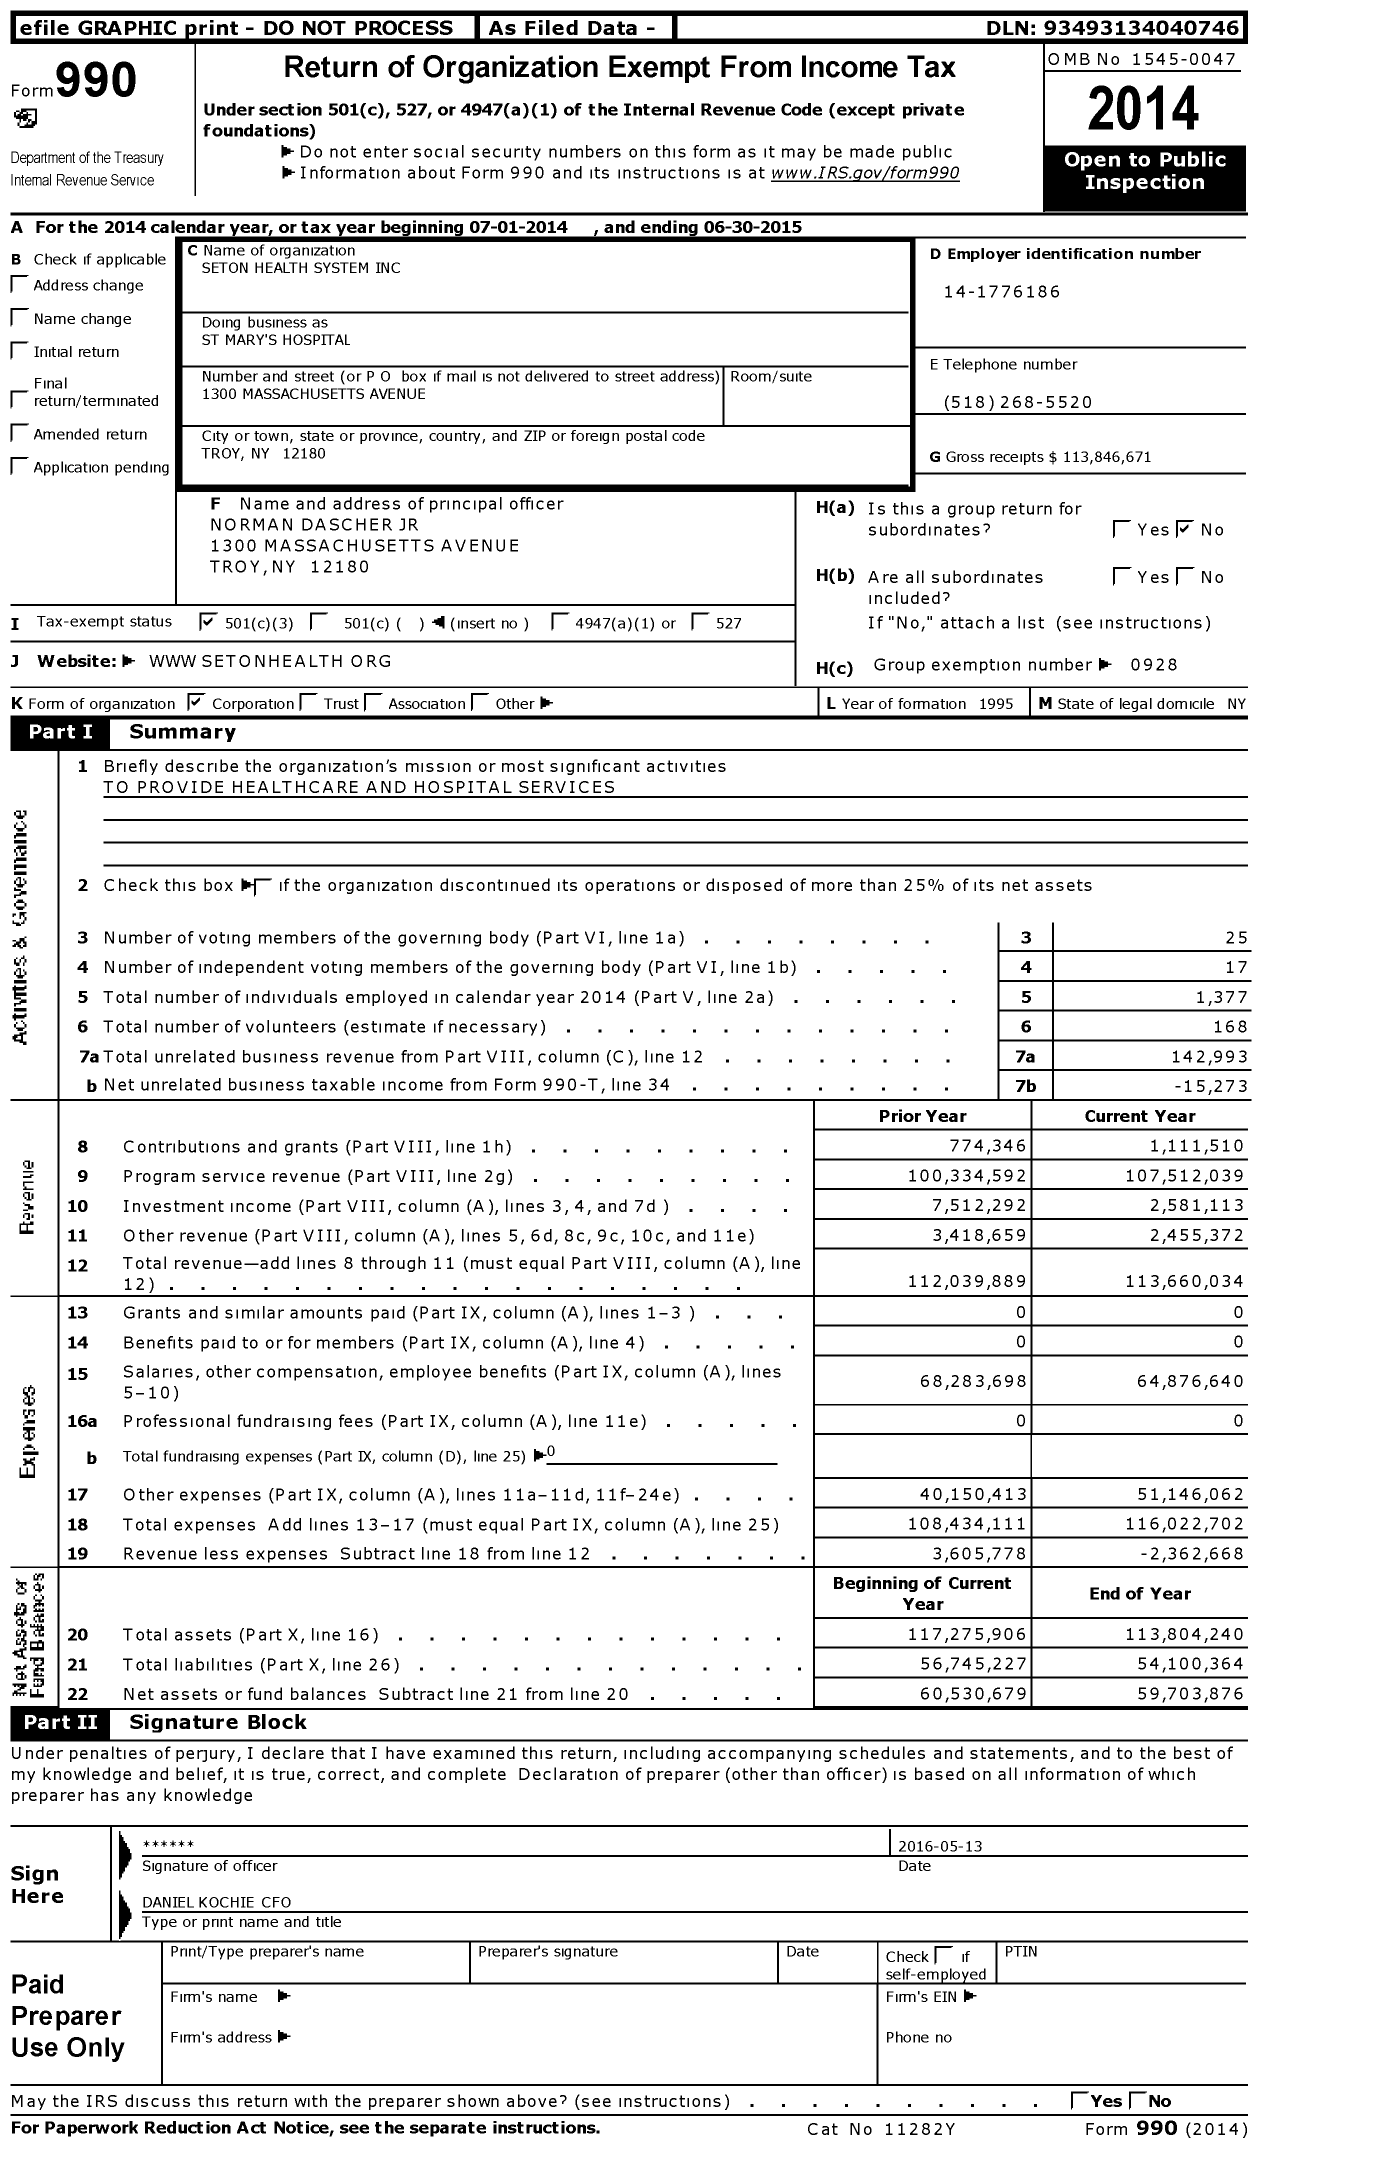 Image of first page of 2014 Form 990 for Seton Health System